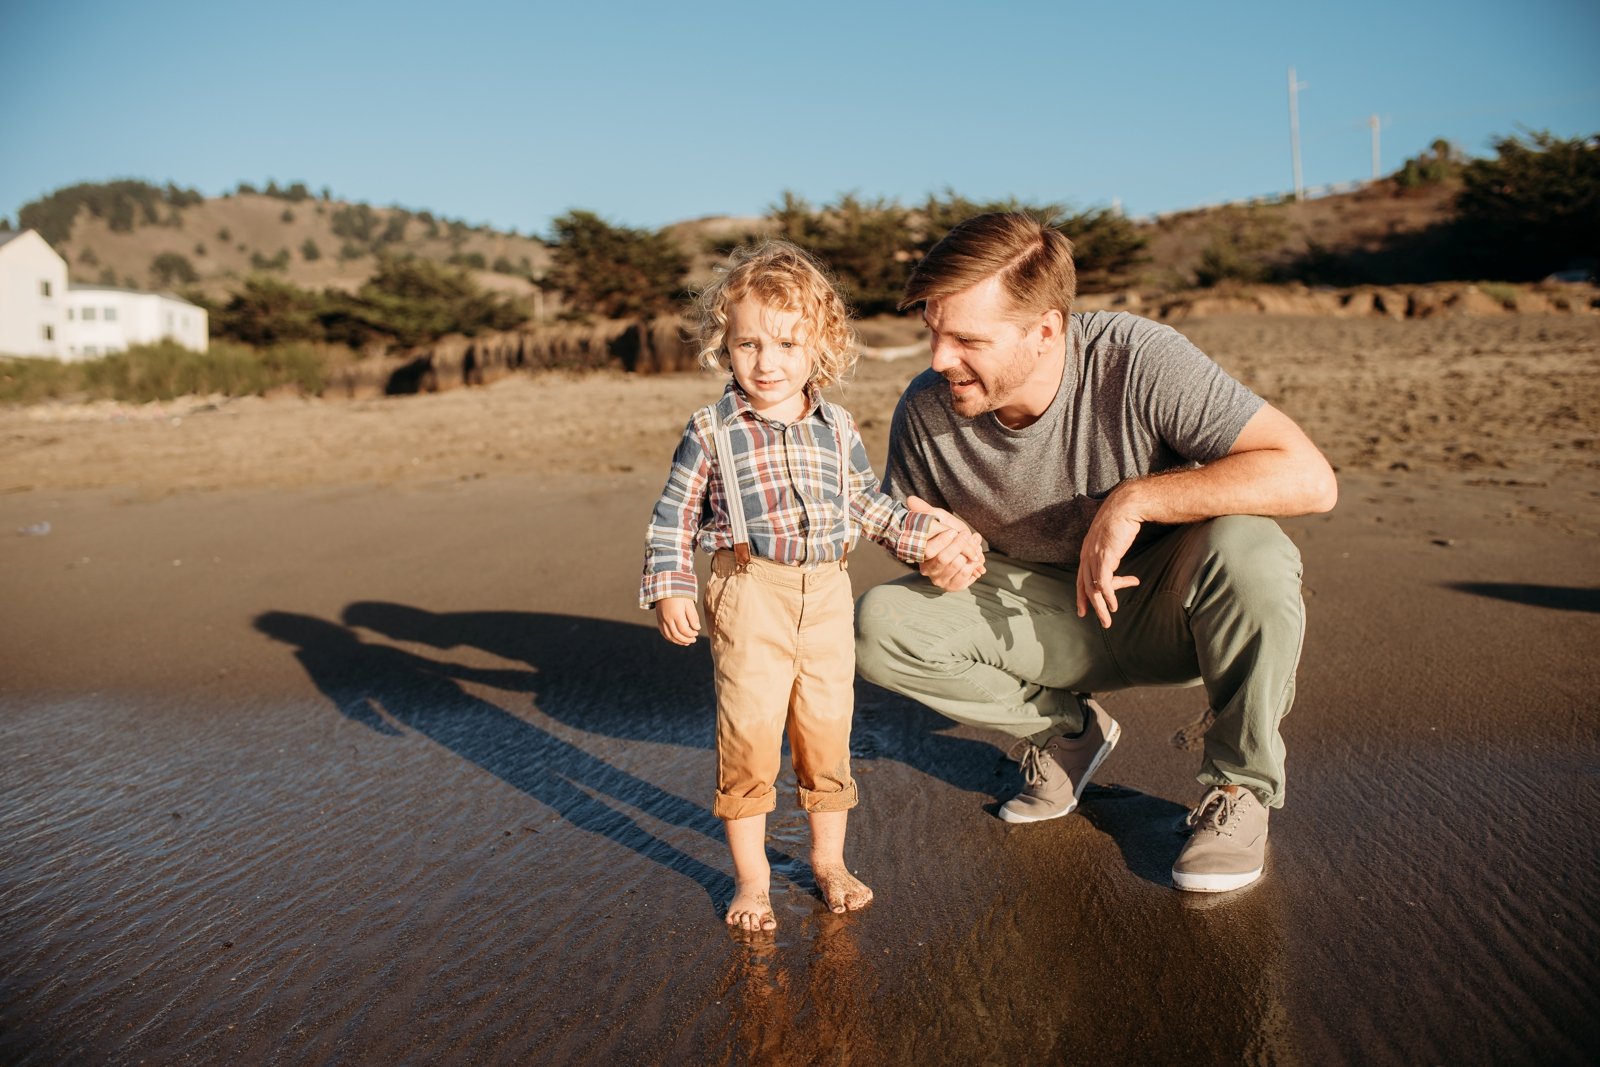 bay area beach photoshoot sunset family lifestyle photographer young soul photography  23.jpg